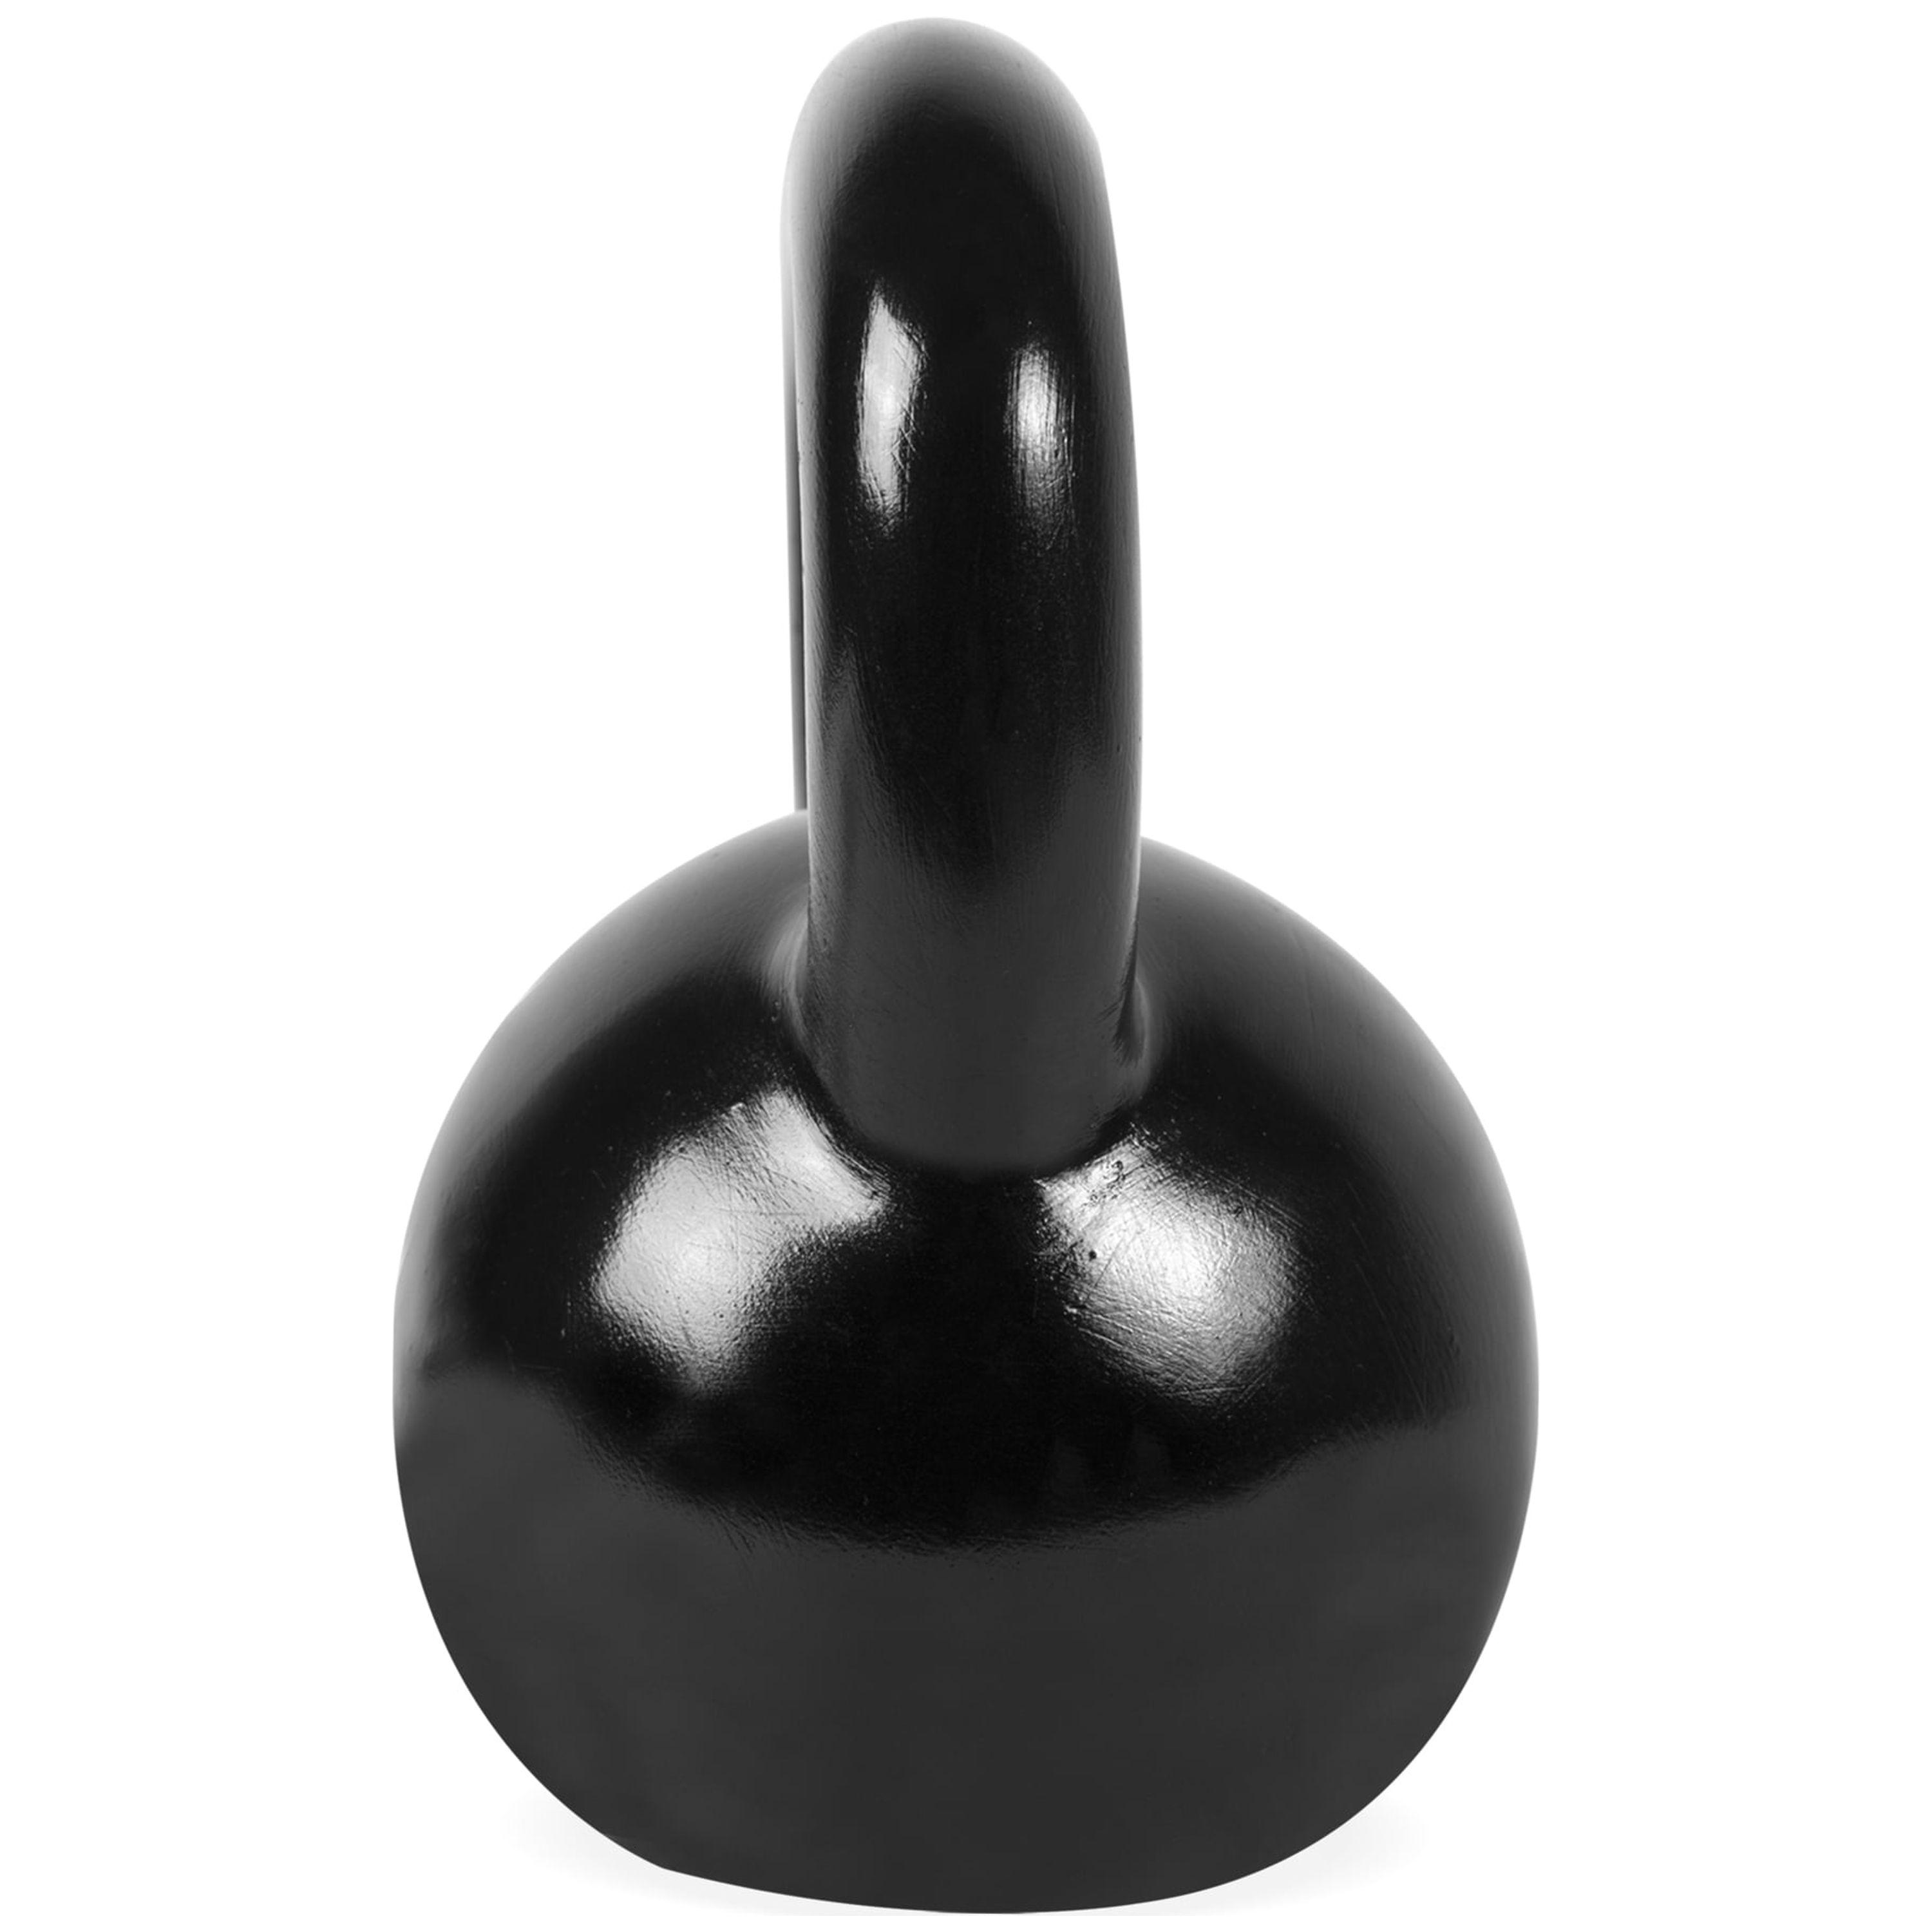 CAP Barbell Cast Iron Kettlebell, Black 20LBS - image 3 of 8